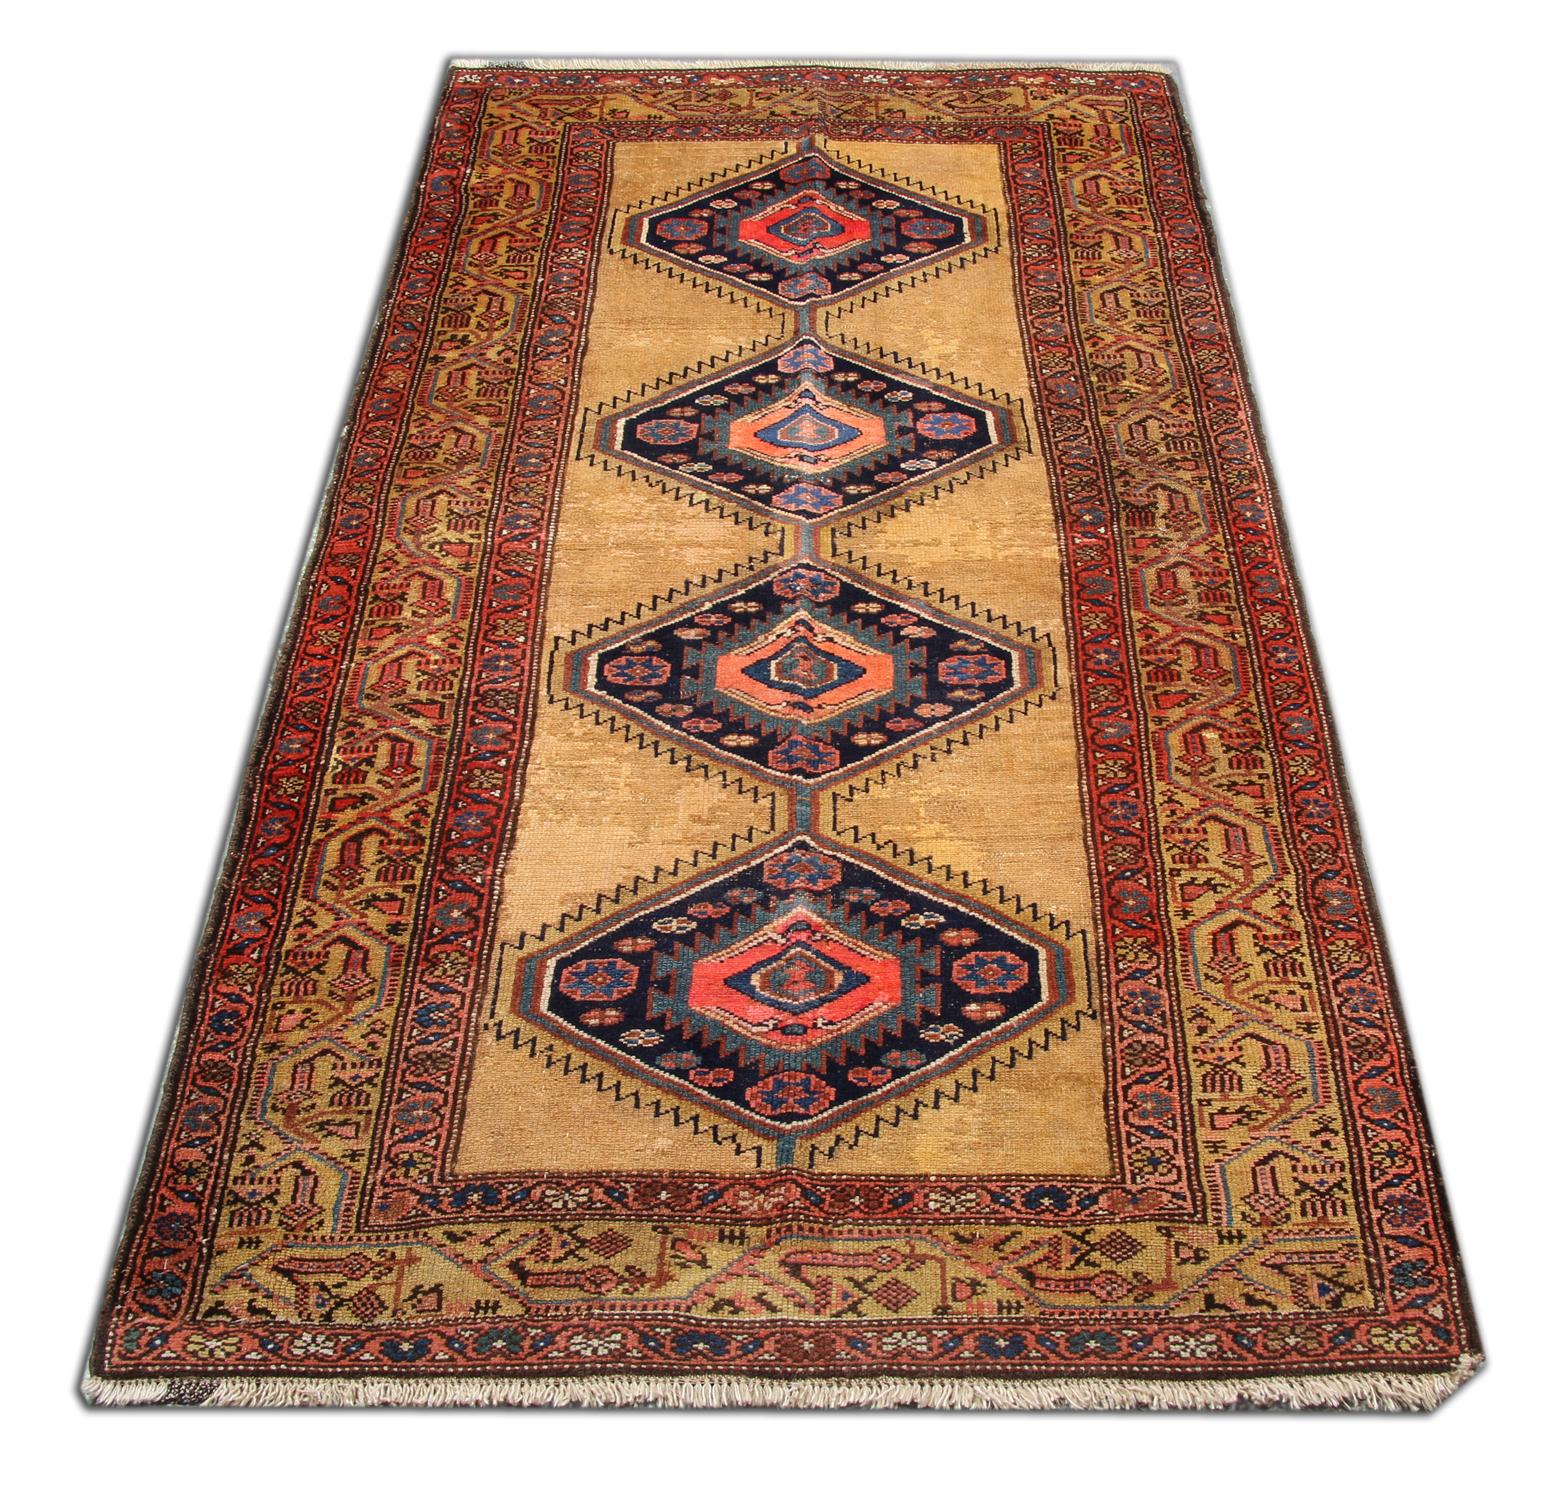 This beautiful Kazak rug features a central medallion design woven in accent colours of blue and red on a beige background. The design and colours used in the construction are unique to the area in which this rug was woven. The unique colour palette